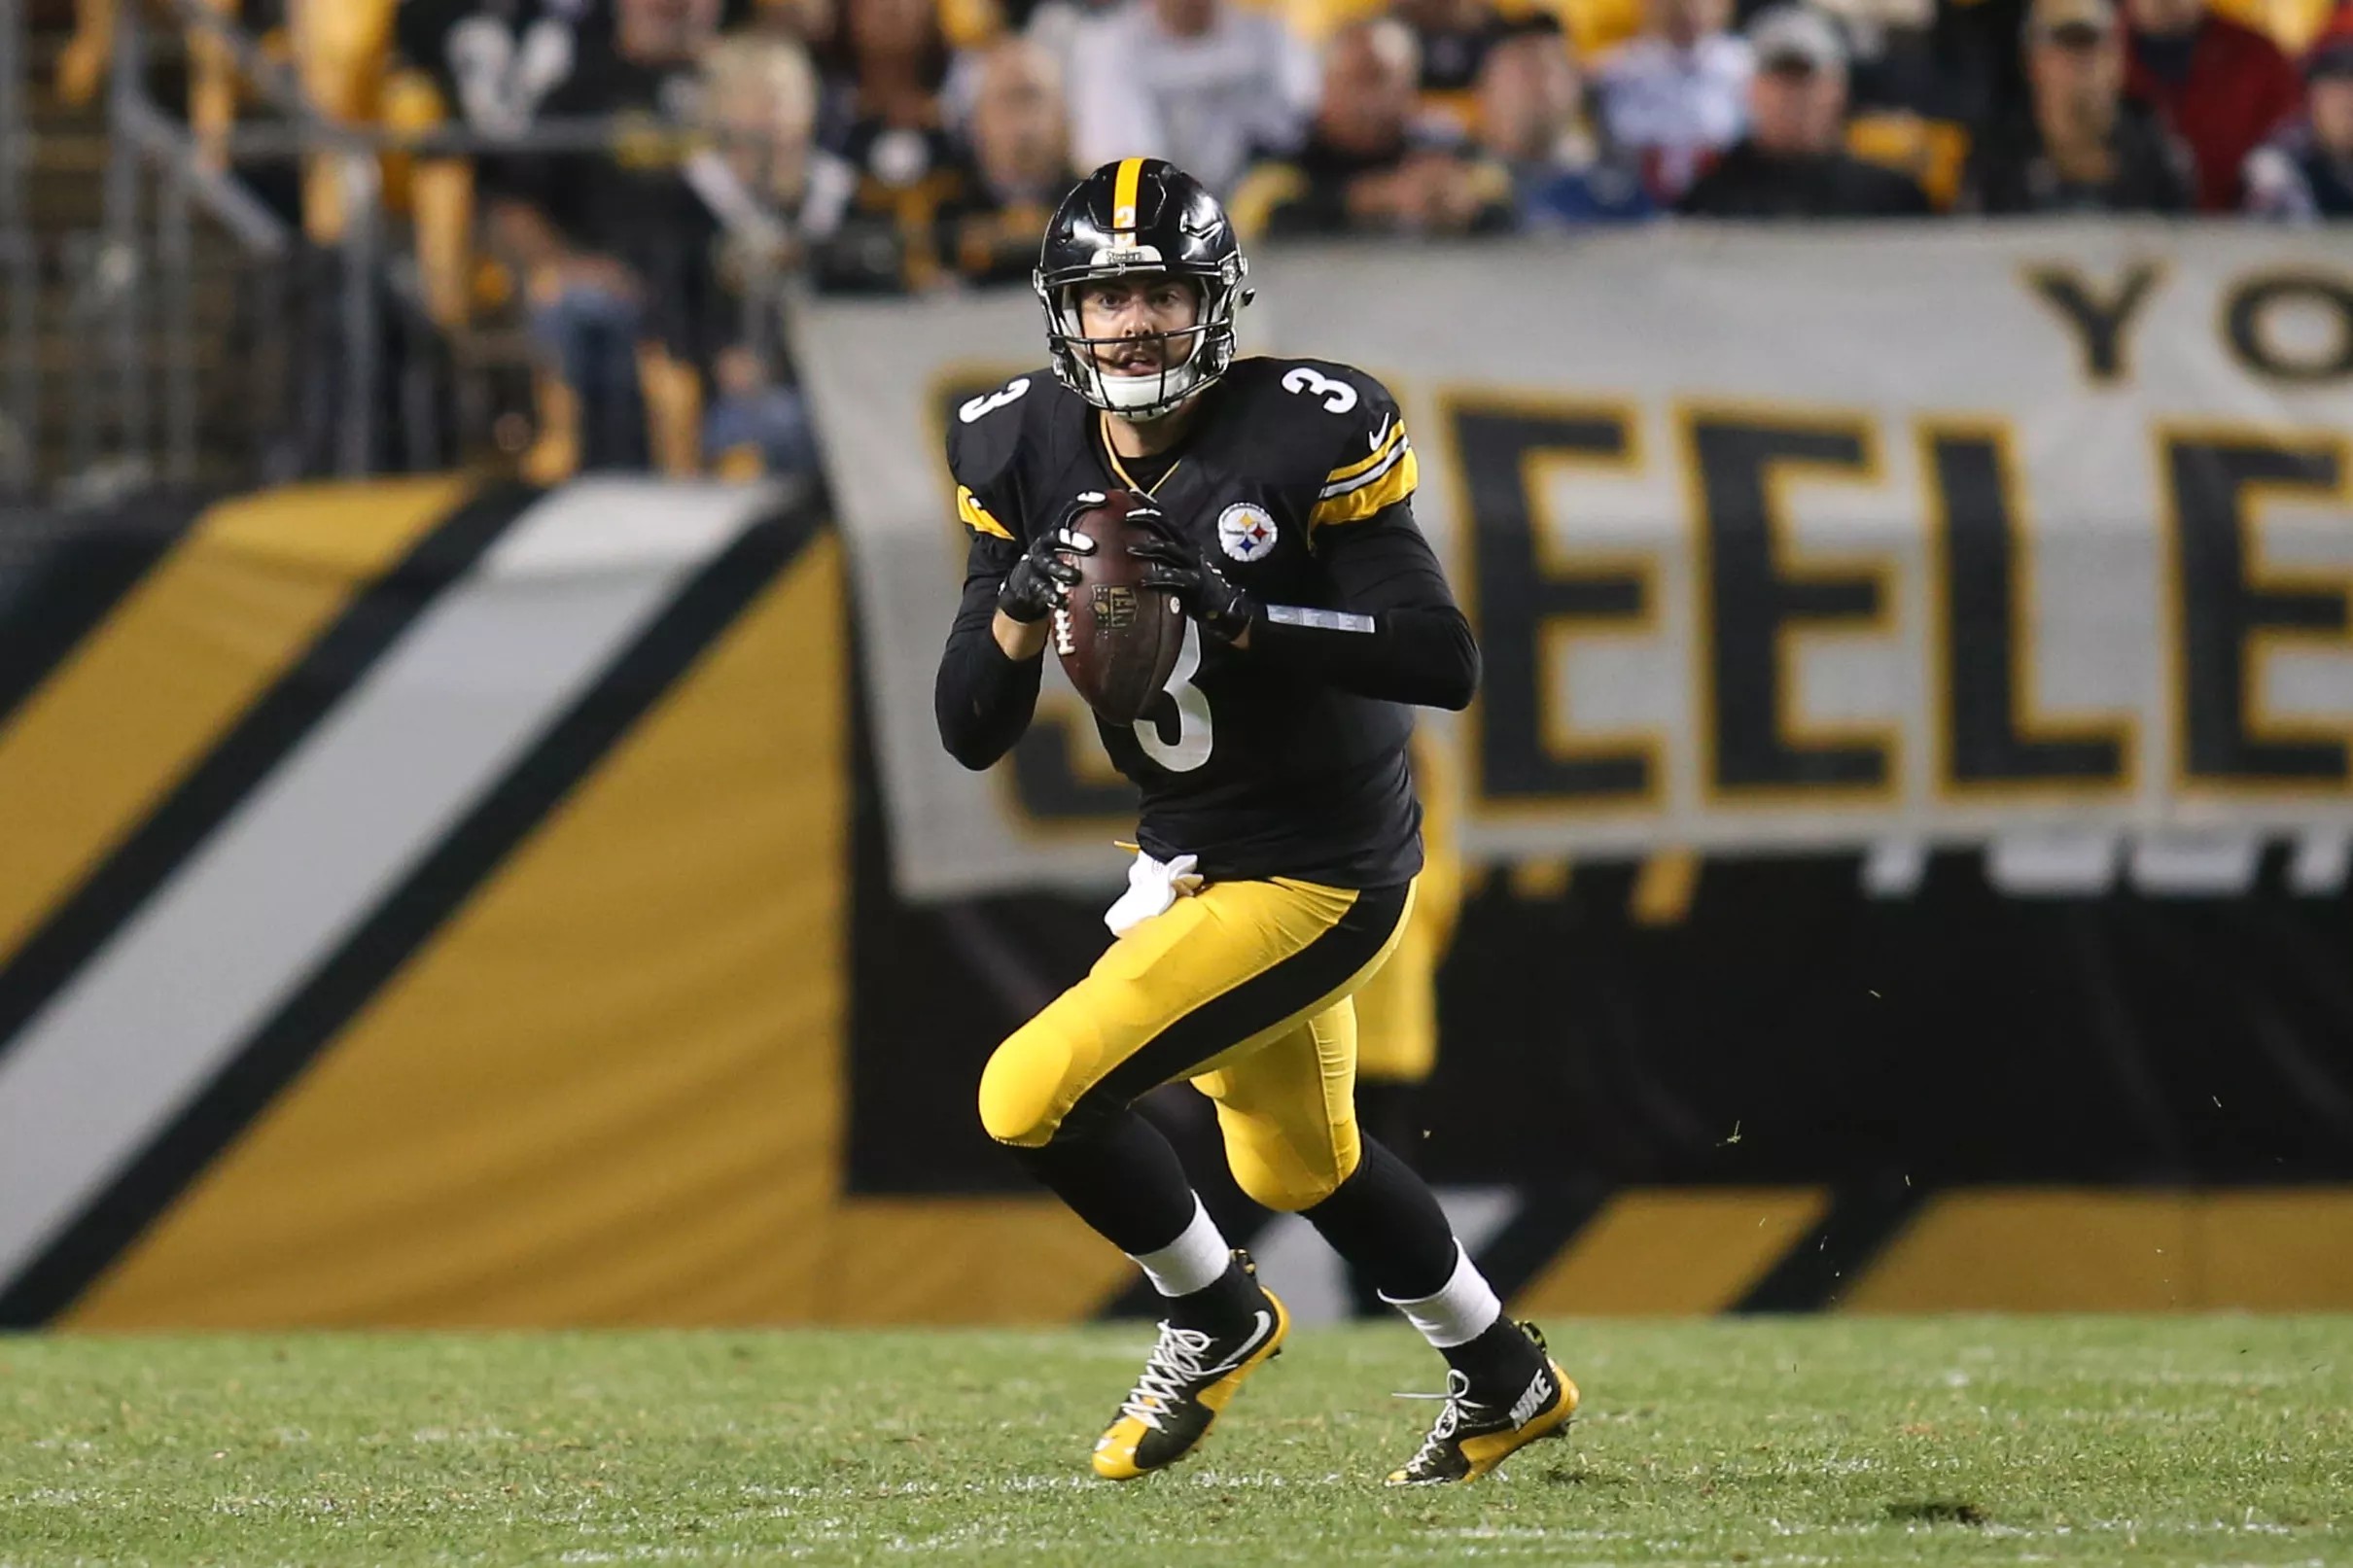 Steelers vs. Colts Preseason Week 3 4 Winners and 3 Losers after the